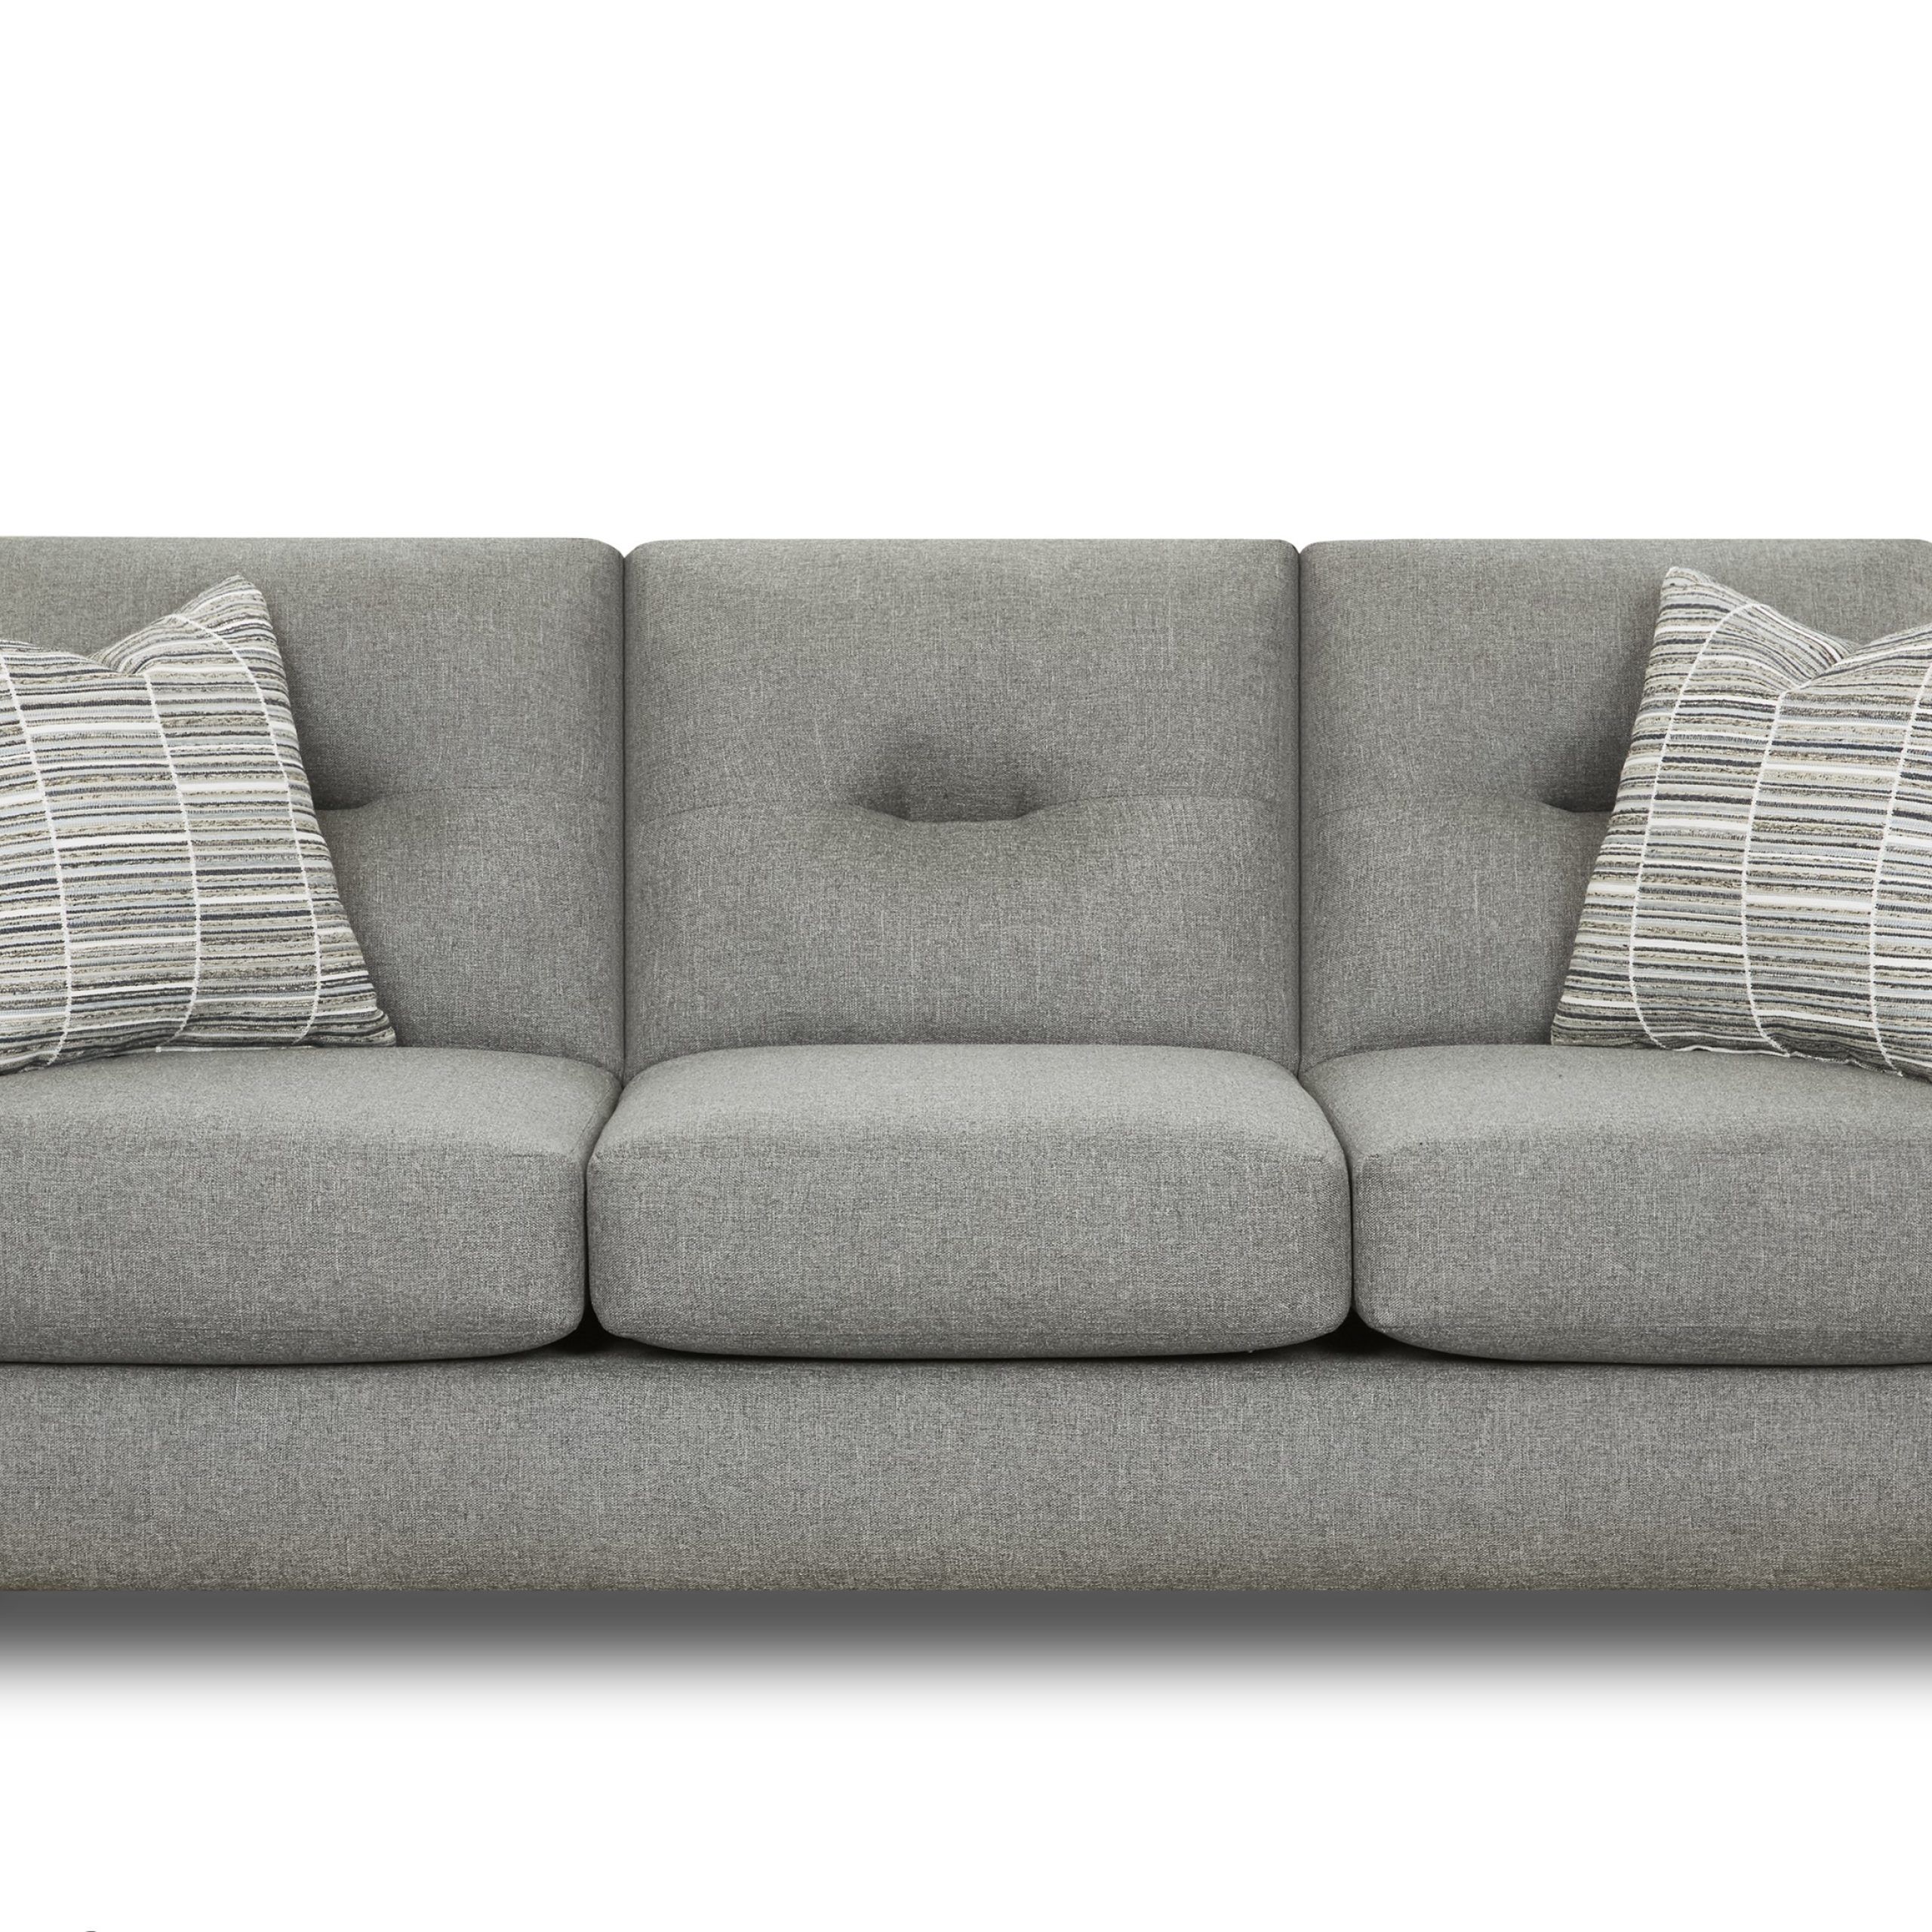 Tnt Charcoal Sofa B018638917fusion Furniture At Godwin's Furniture Within Light Charcoal Linen Sofas (Gallery 14 of 20)